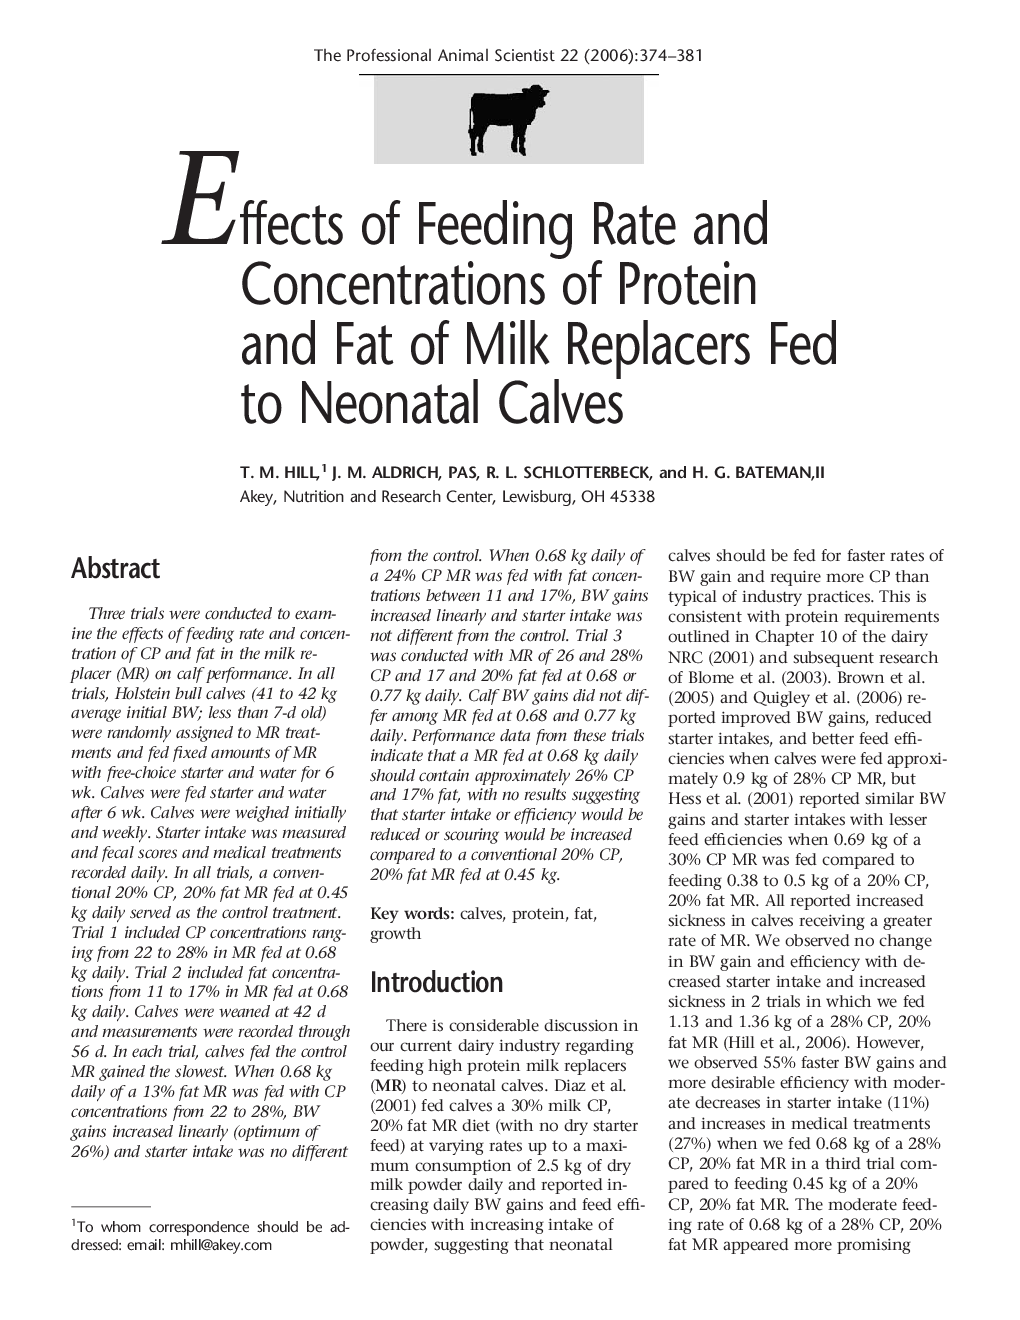 Effects of Feeding Rate and Concentrations of Protein and Fat of Milk Replacers Fed to Neonatal Calves